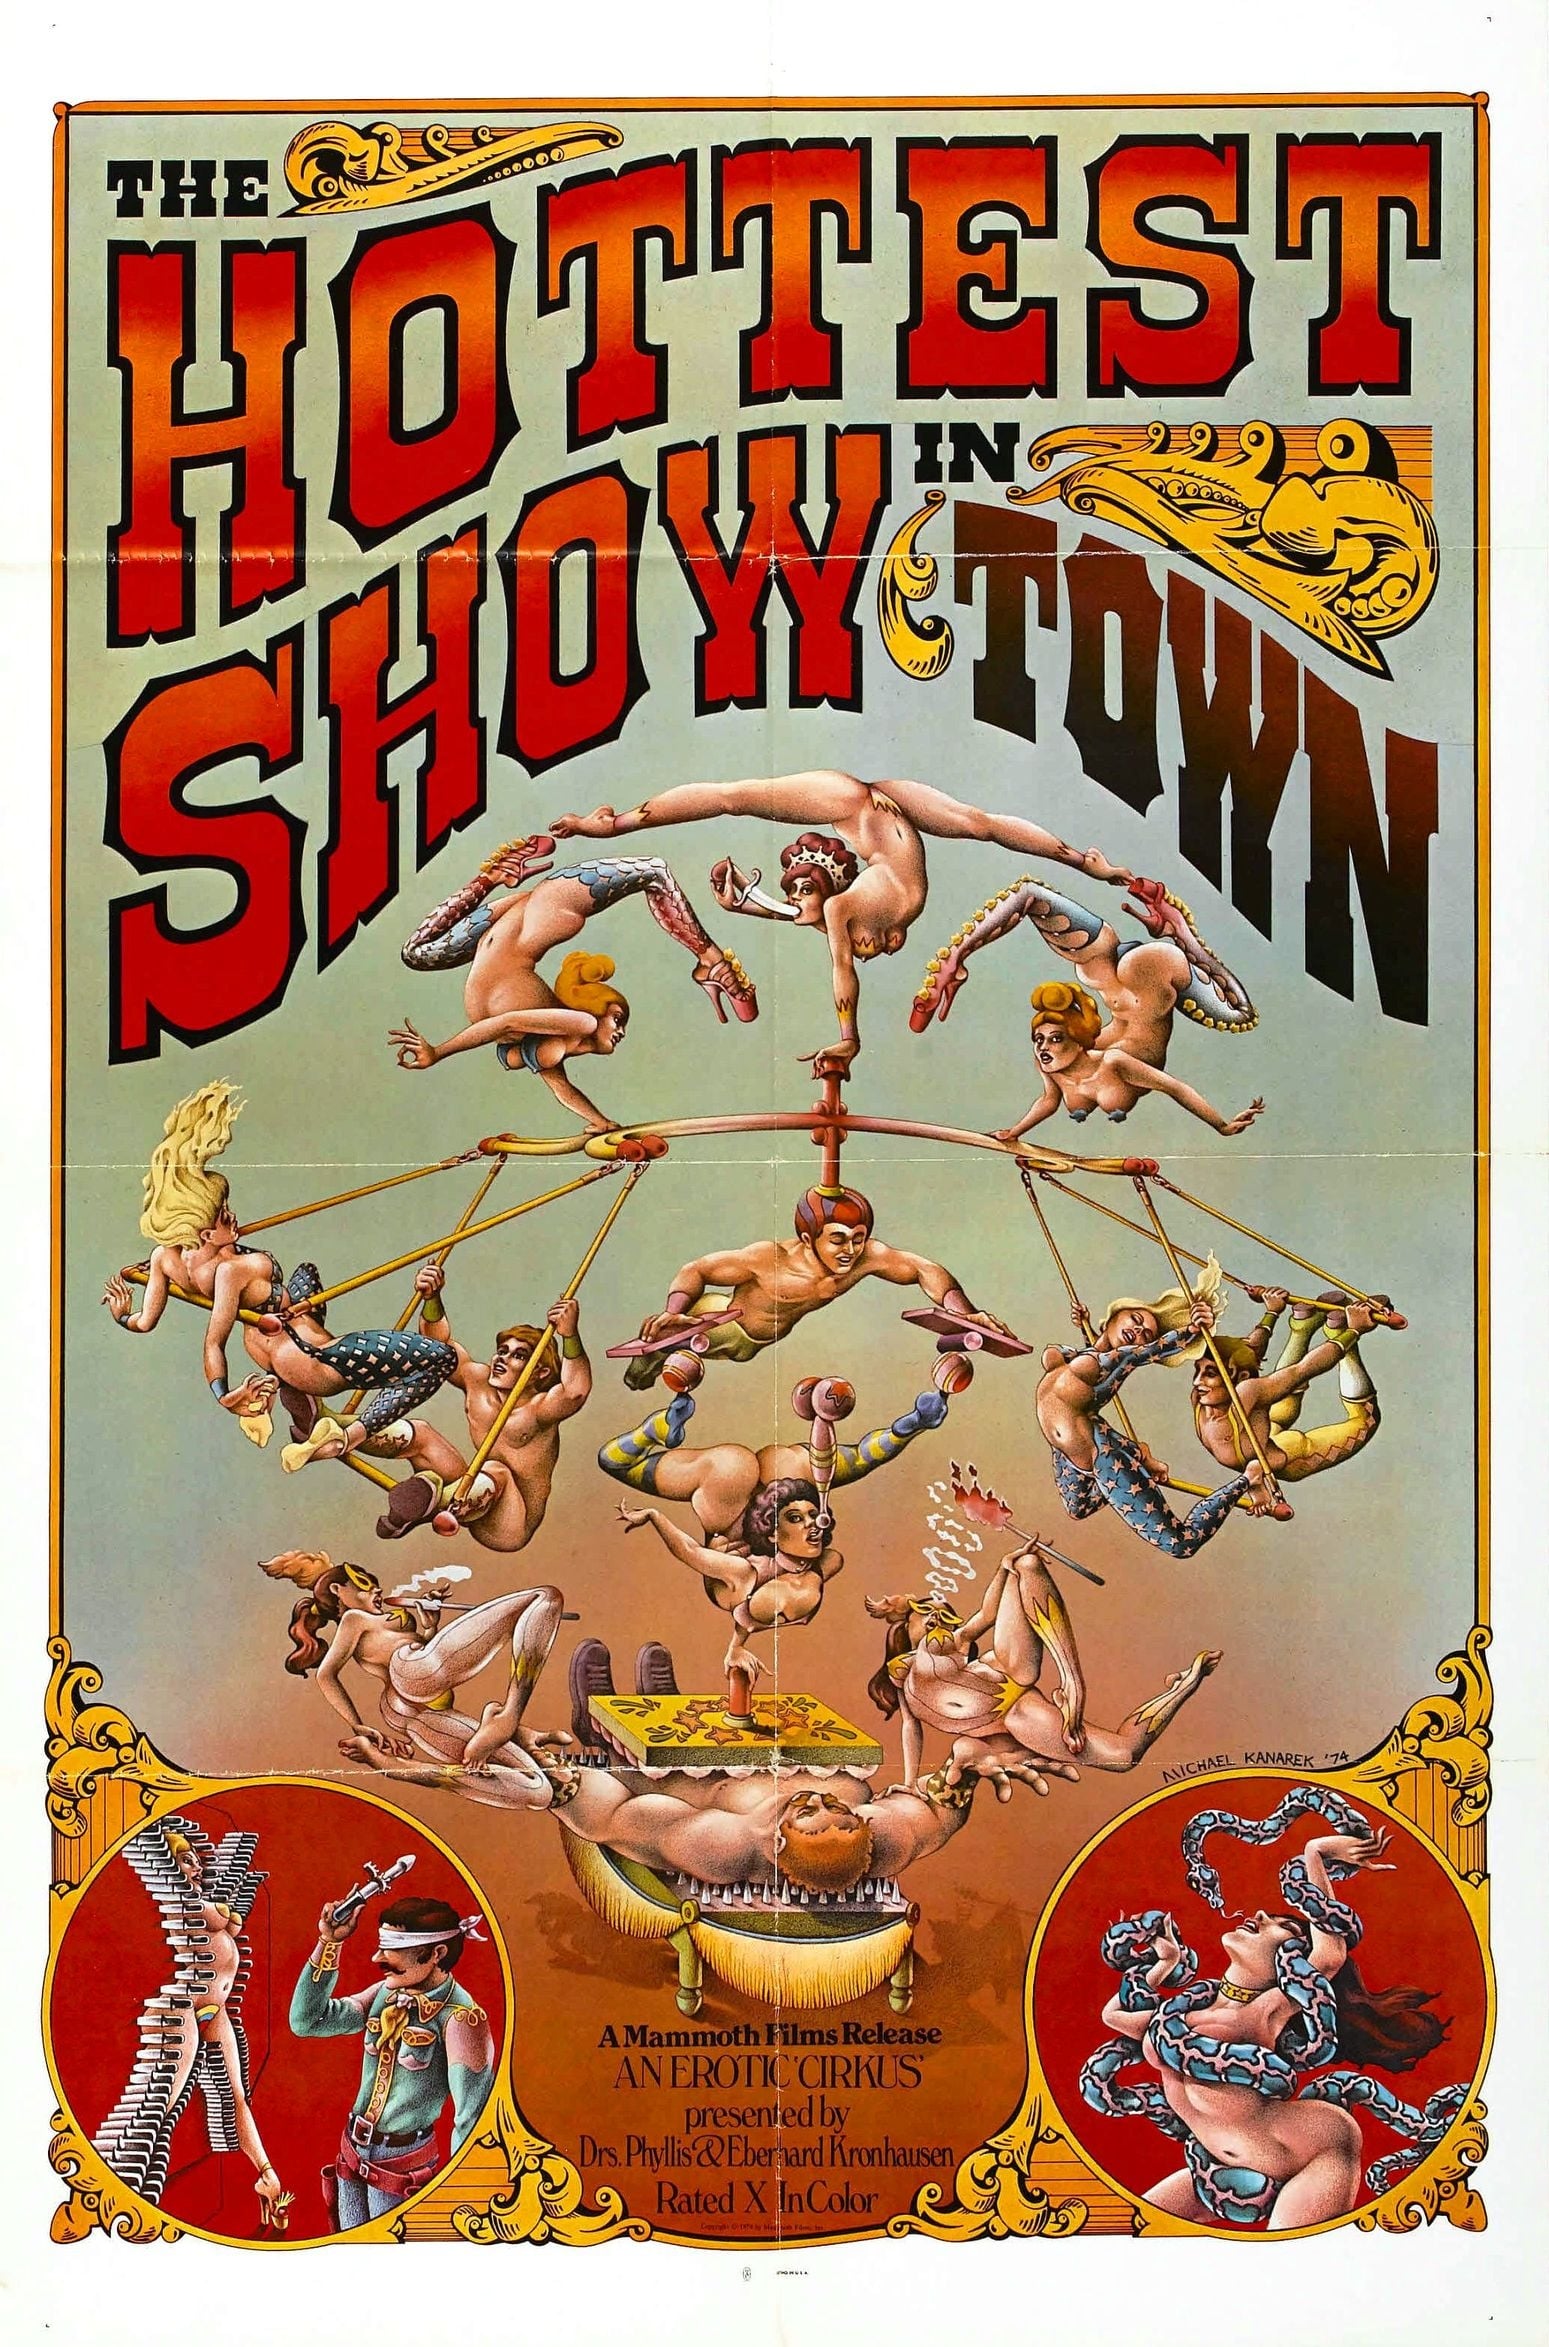 The Hottest Show in Town (1974)